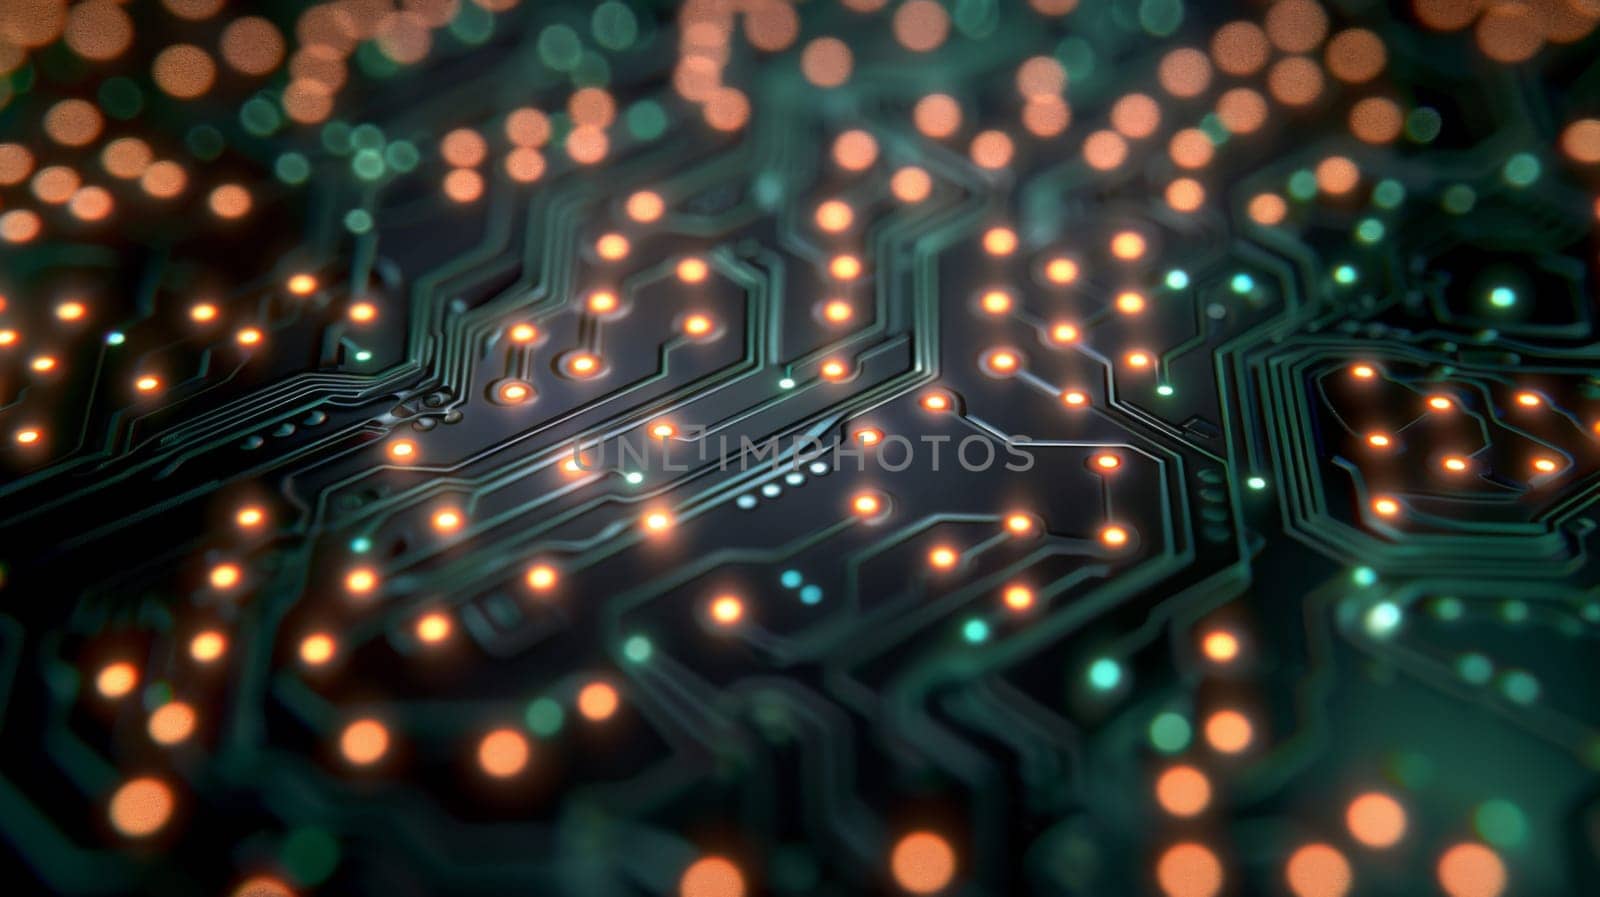 A close up of a circuit board with many lights on it